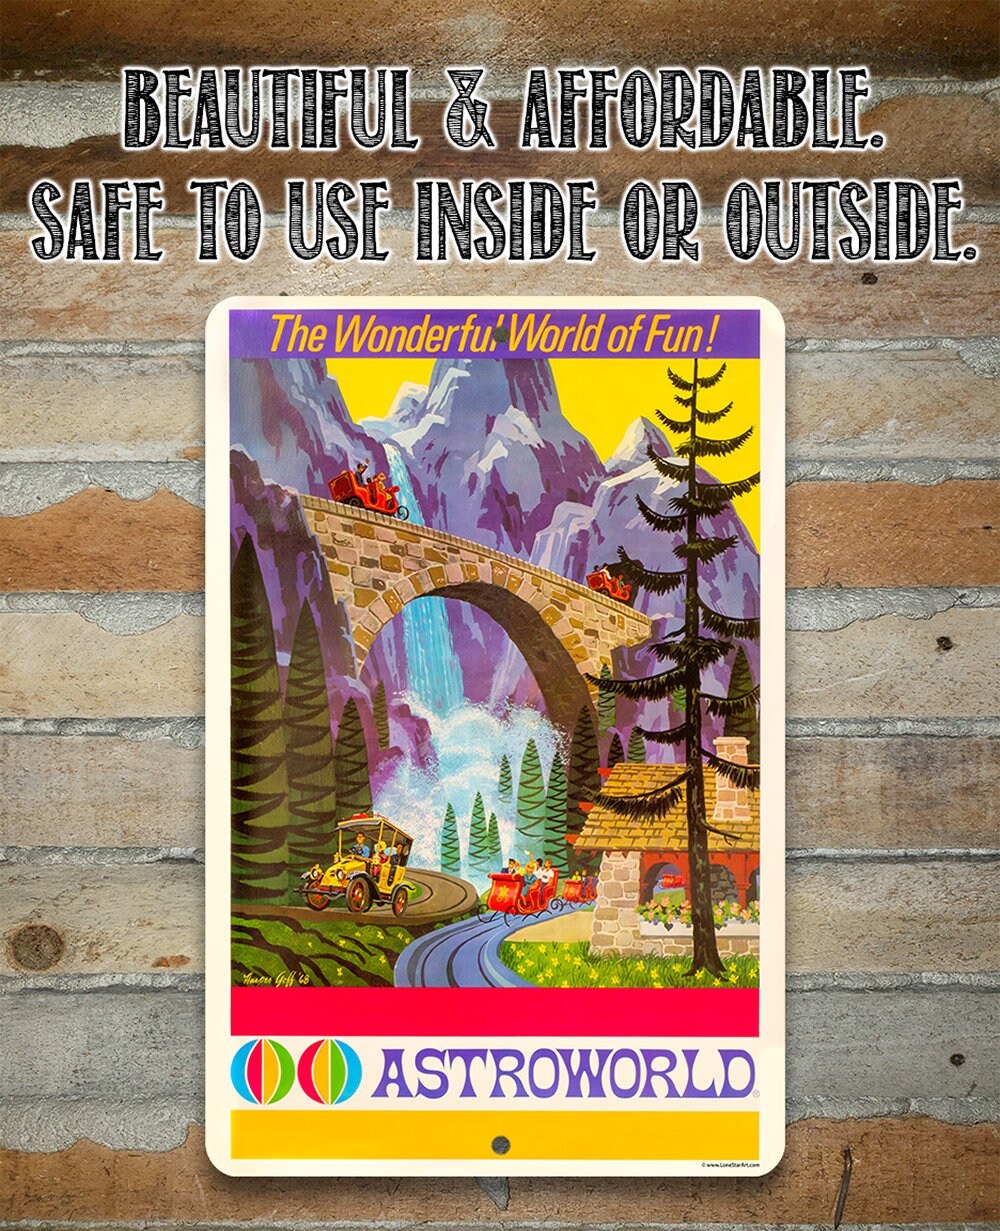 Tin - Metal Sign - AstroWorld Alpine Sleigh Ride - 8"x12" or 12"x 18" Use Indoor/Outdoor - Gift for Amusement Park Enthusiasts Lone Star Art 